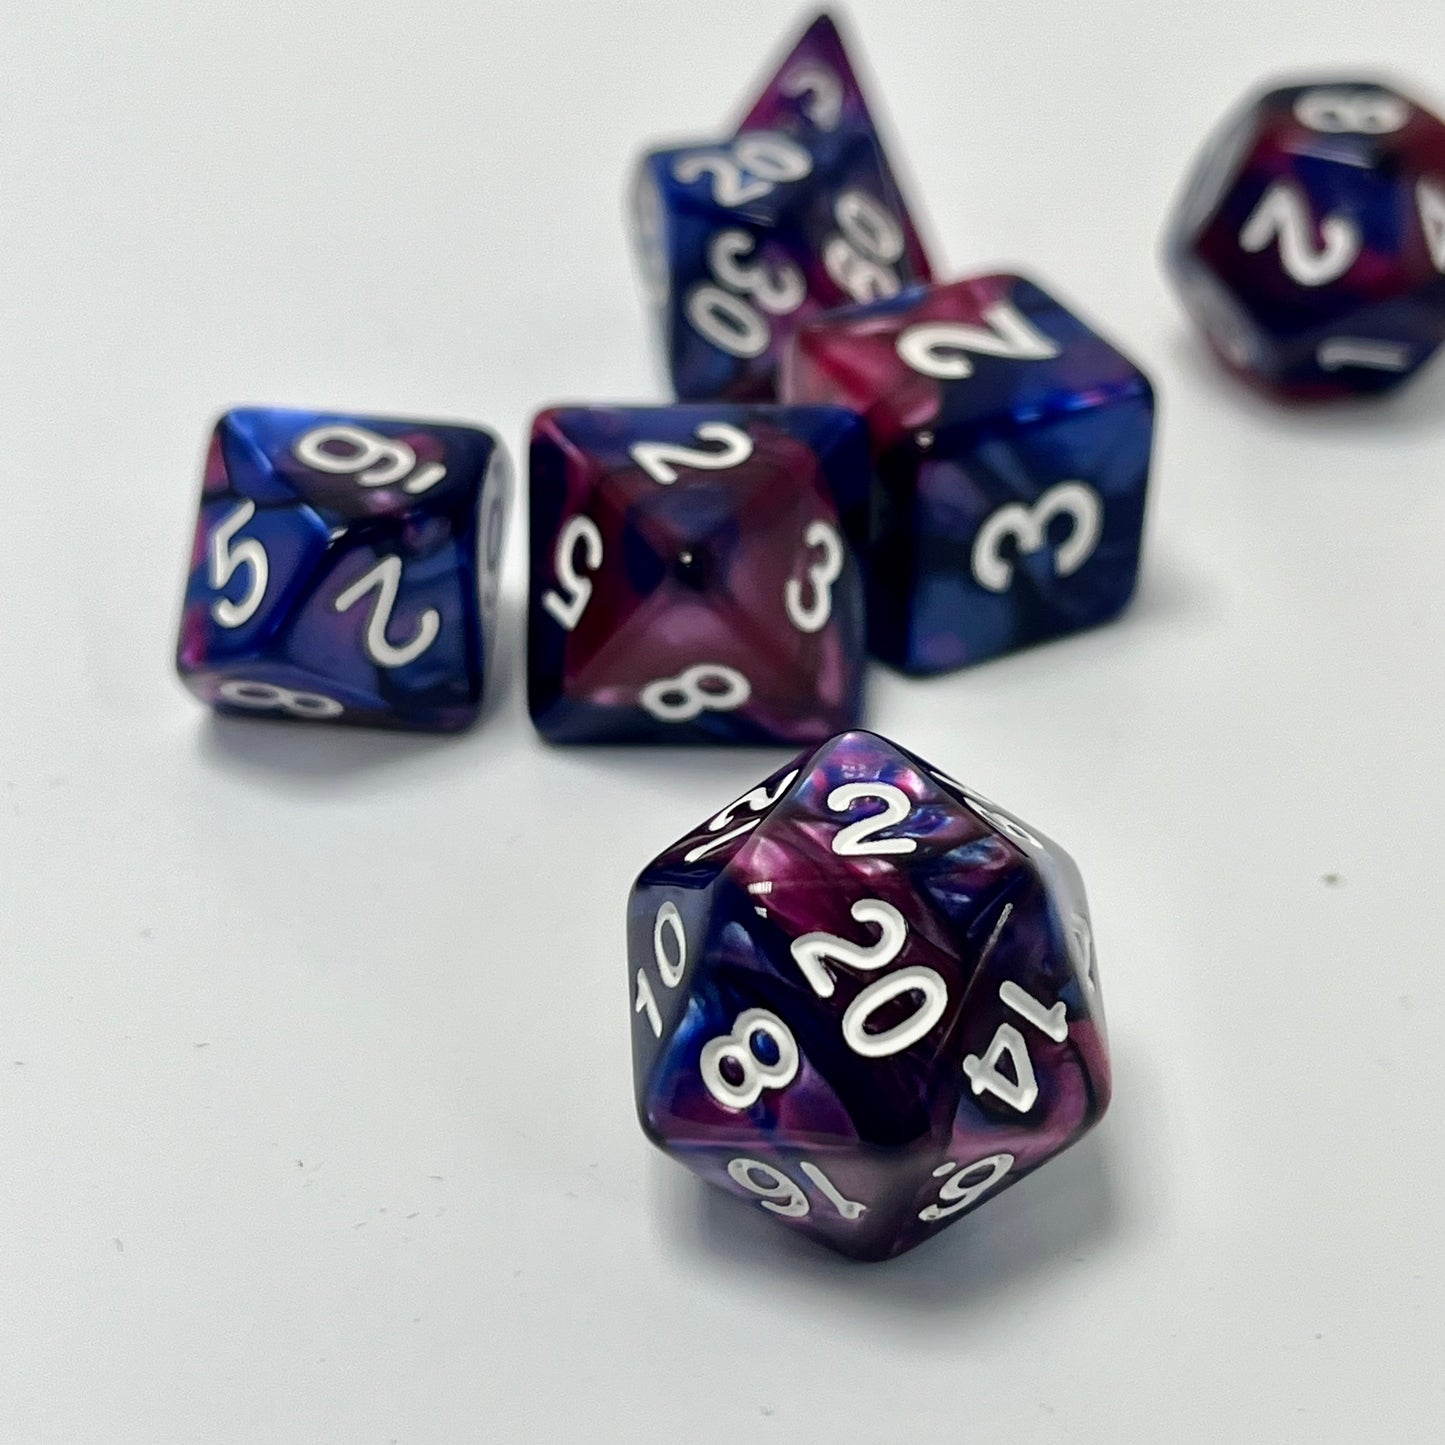 DND TTRPG dice set for role playing games, dungeons and dragons and dice goblin and dice dragon collectors